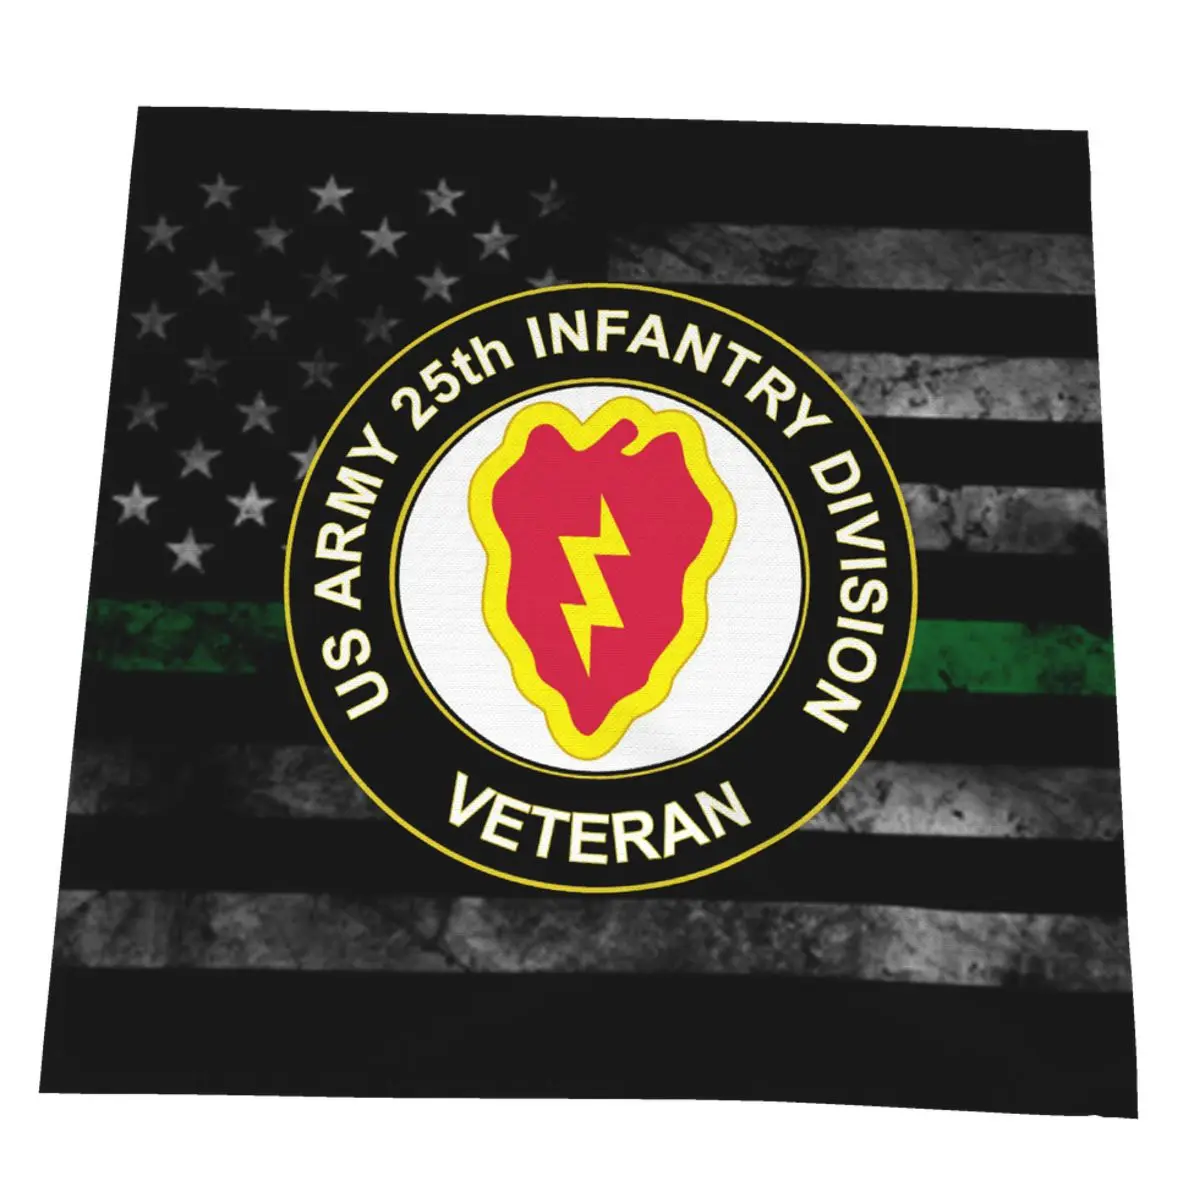 

US Army Veteran 25th Infantry Division Napkin Party Wedding Table Cloth Linen Cotton Available Restaurant Dinner Premium Hotel